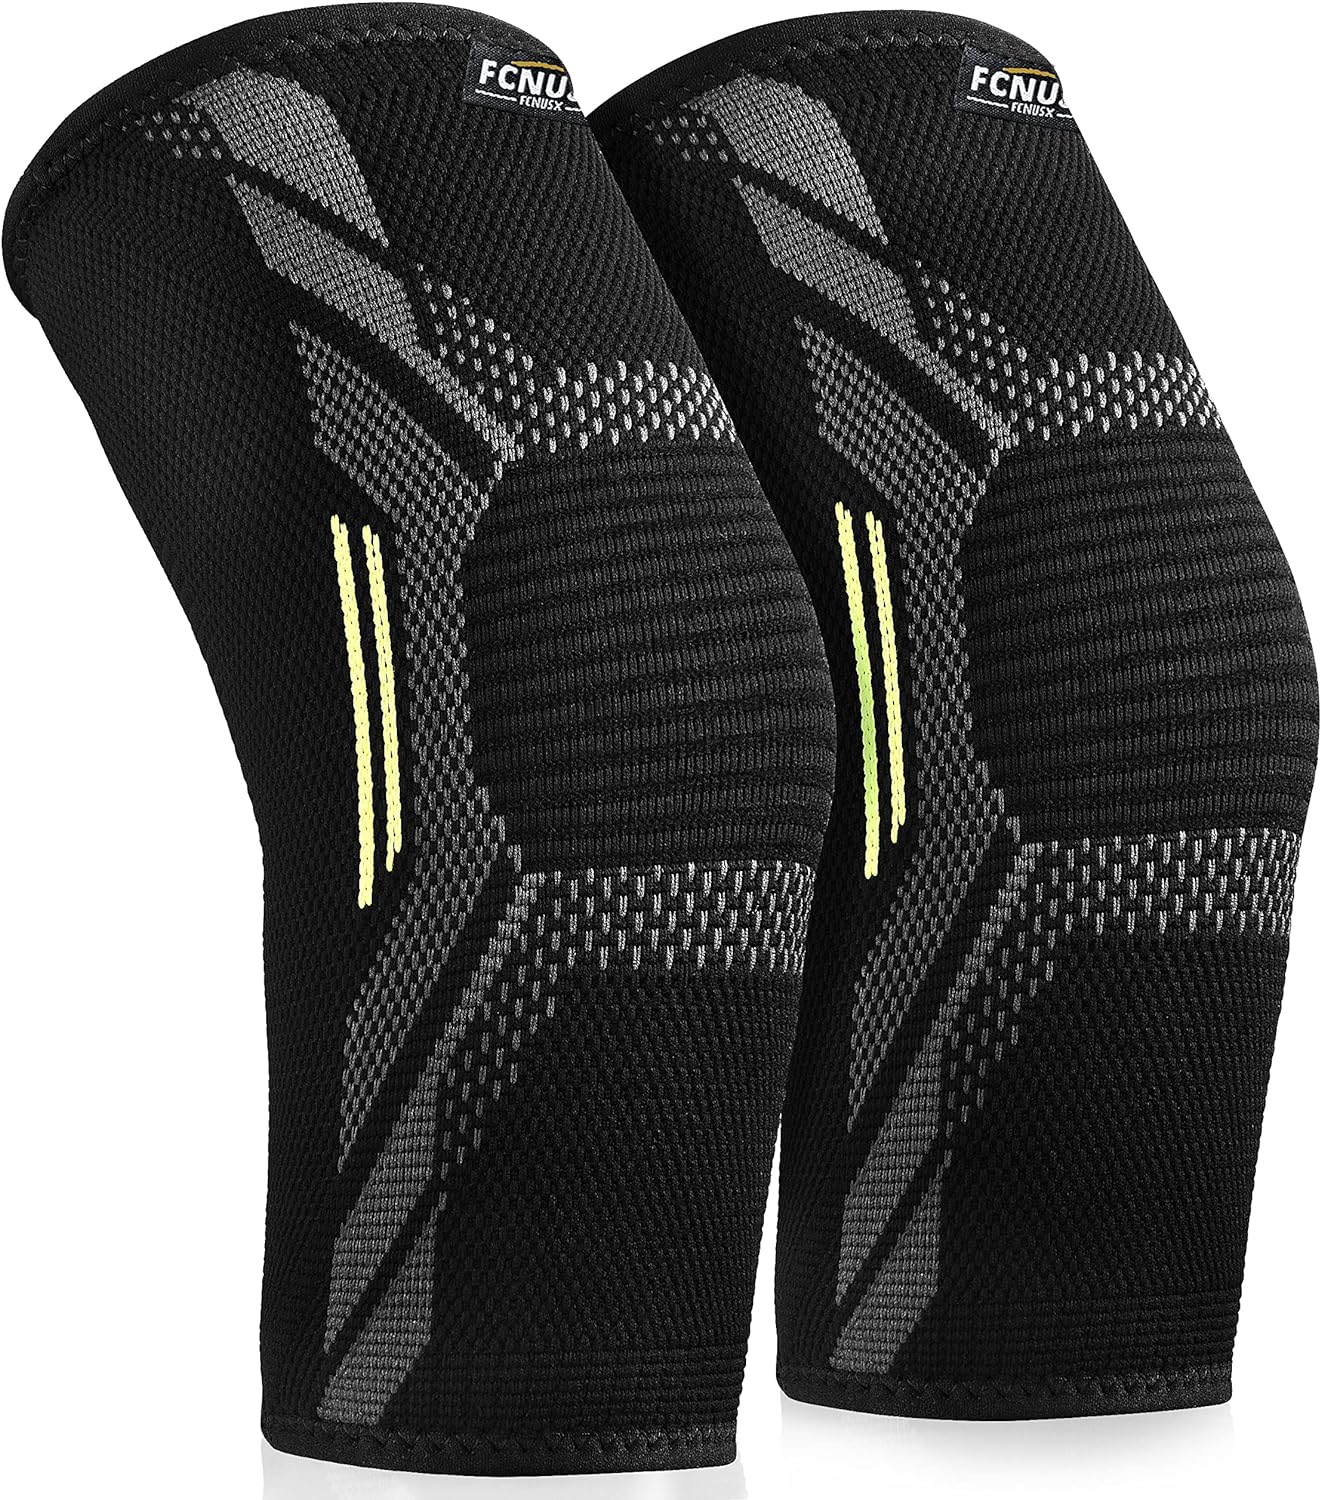 Elbow Brace Compression Sleeve for Men  Women (1 pair), Arm Support Sleeves Forearm Pain Relief Pads Braces for Tendonitis, Tennis  Golfers Elbow Treatment, Arthritis, Workout, Weight lifting